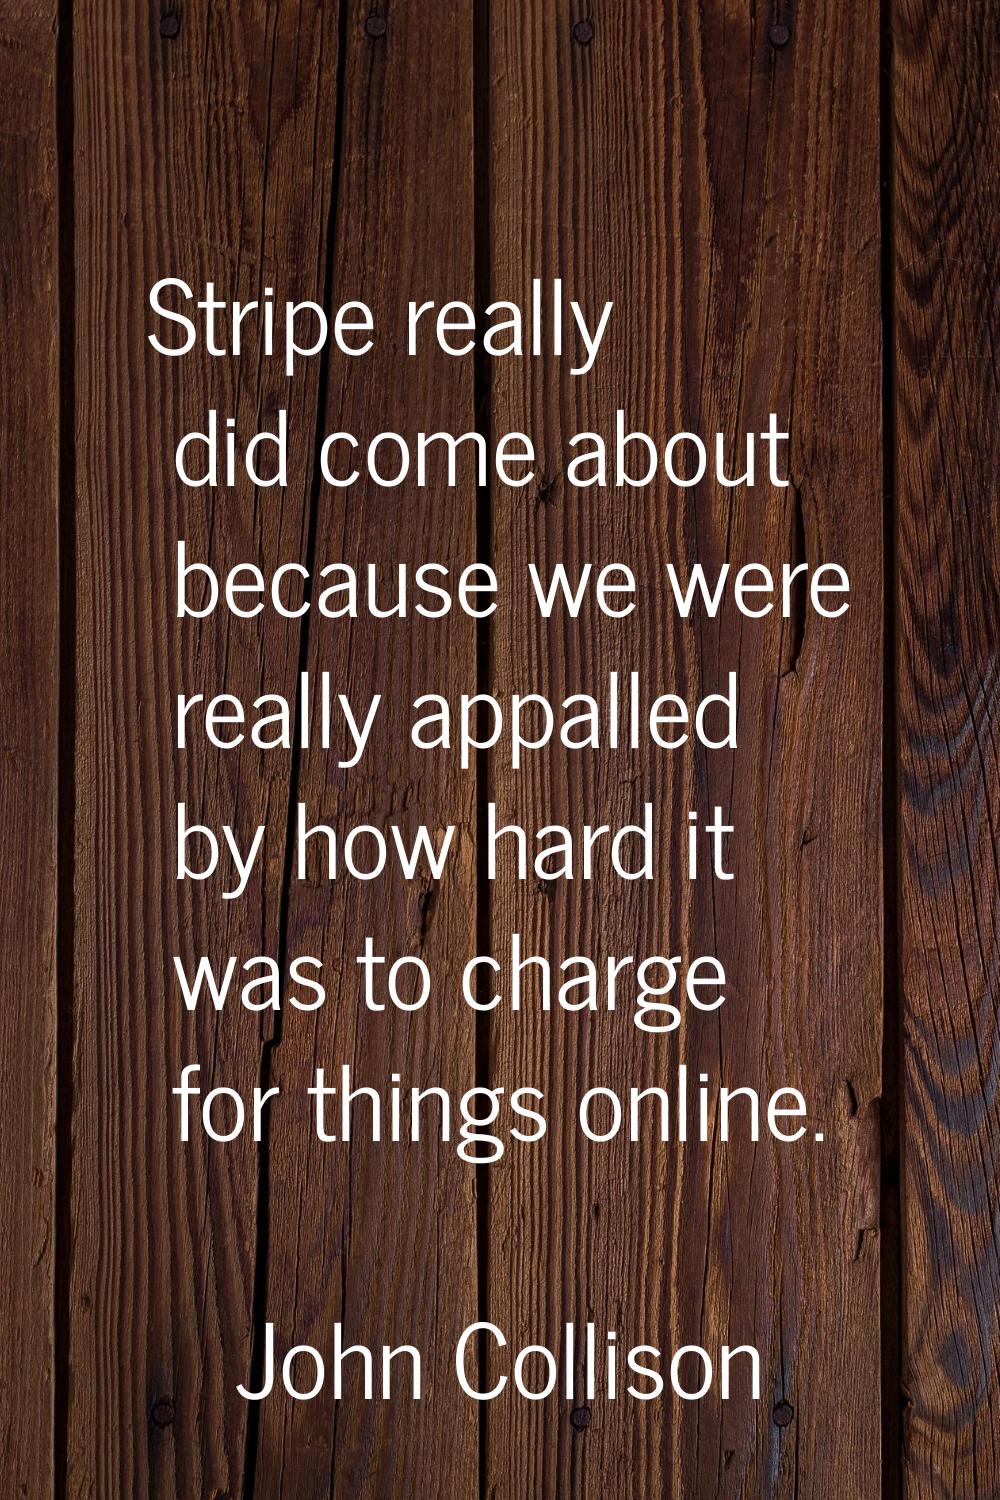 Stripe really did come about because we were really appalled by how hard it was to charge for thing